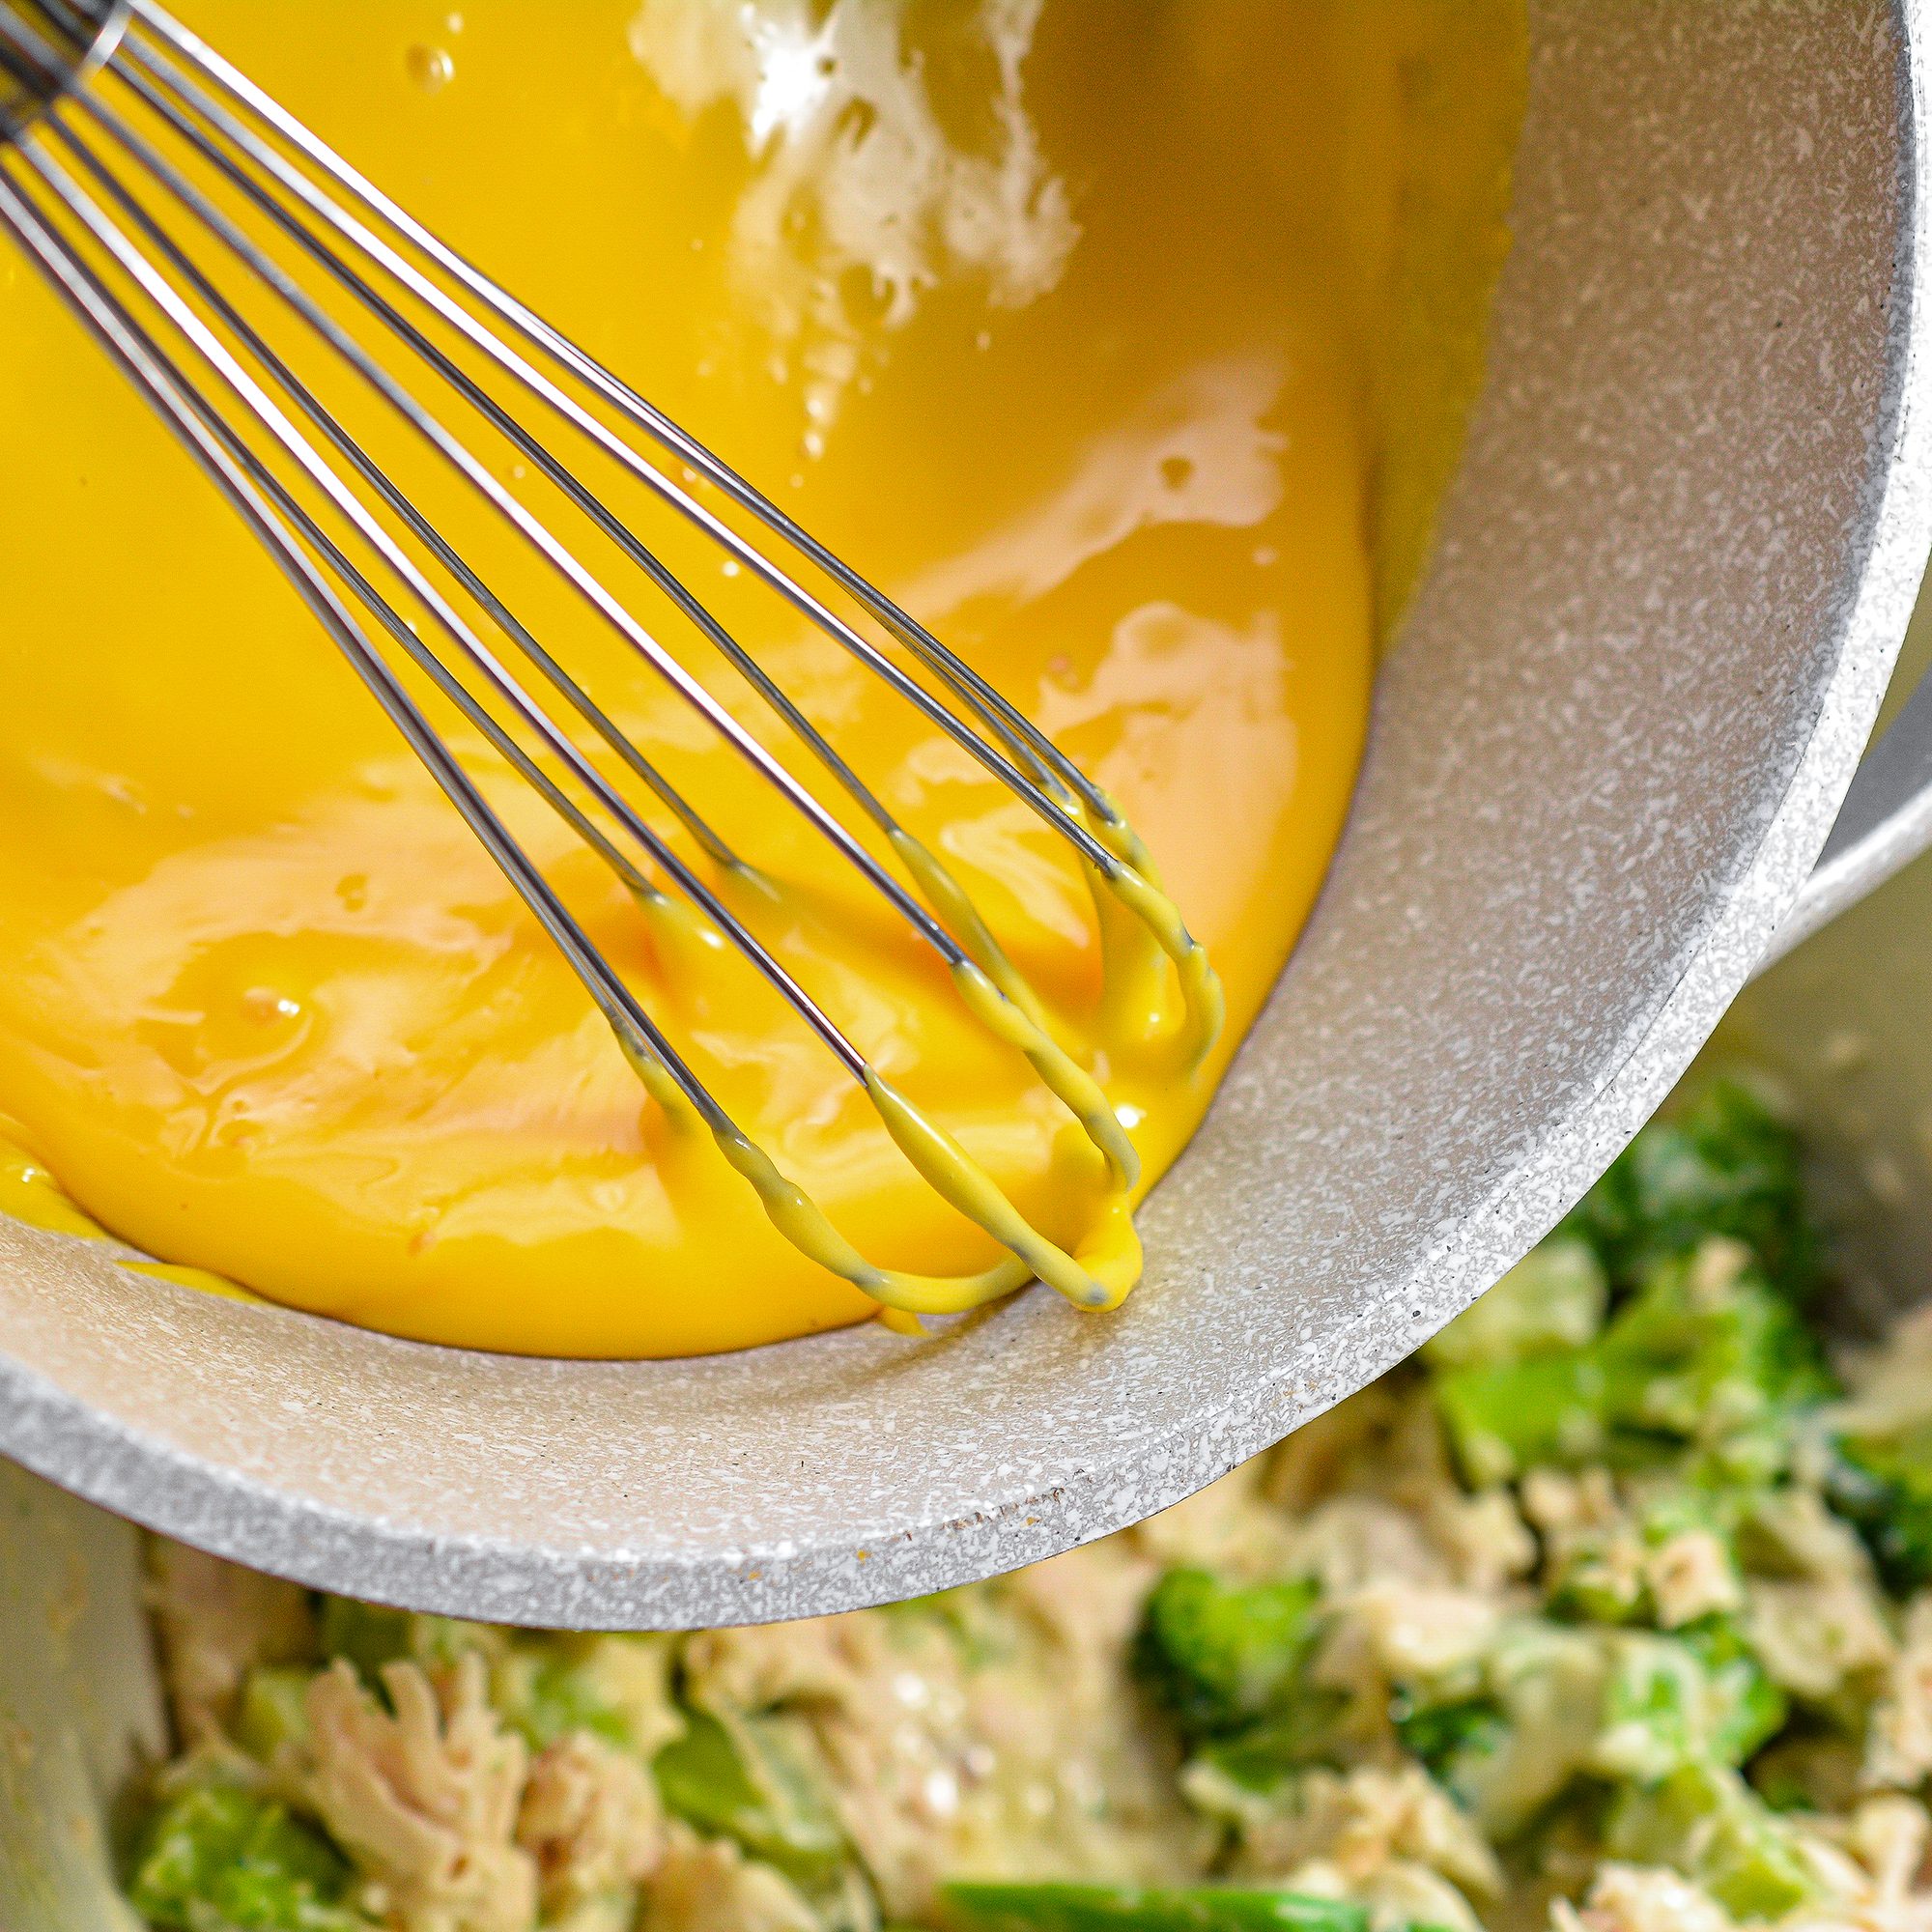 Pour the soup over the chicken and broccoli, and stir to combine.